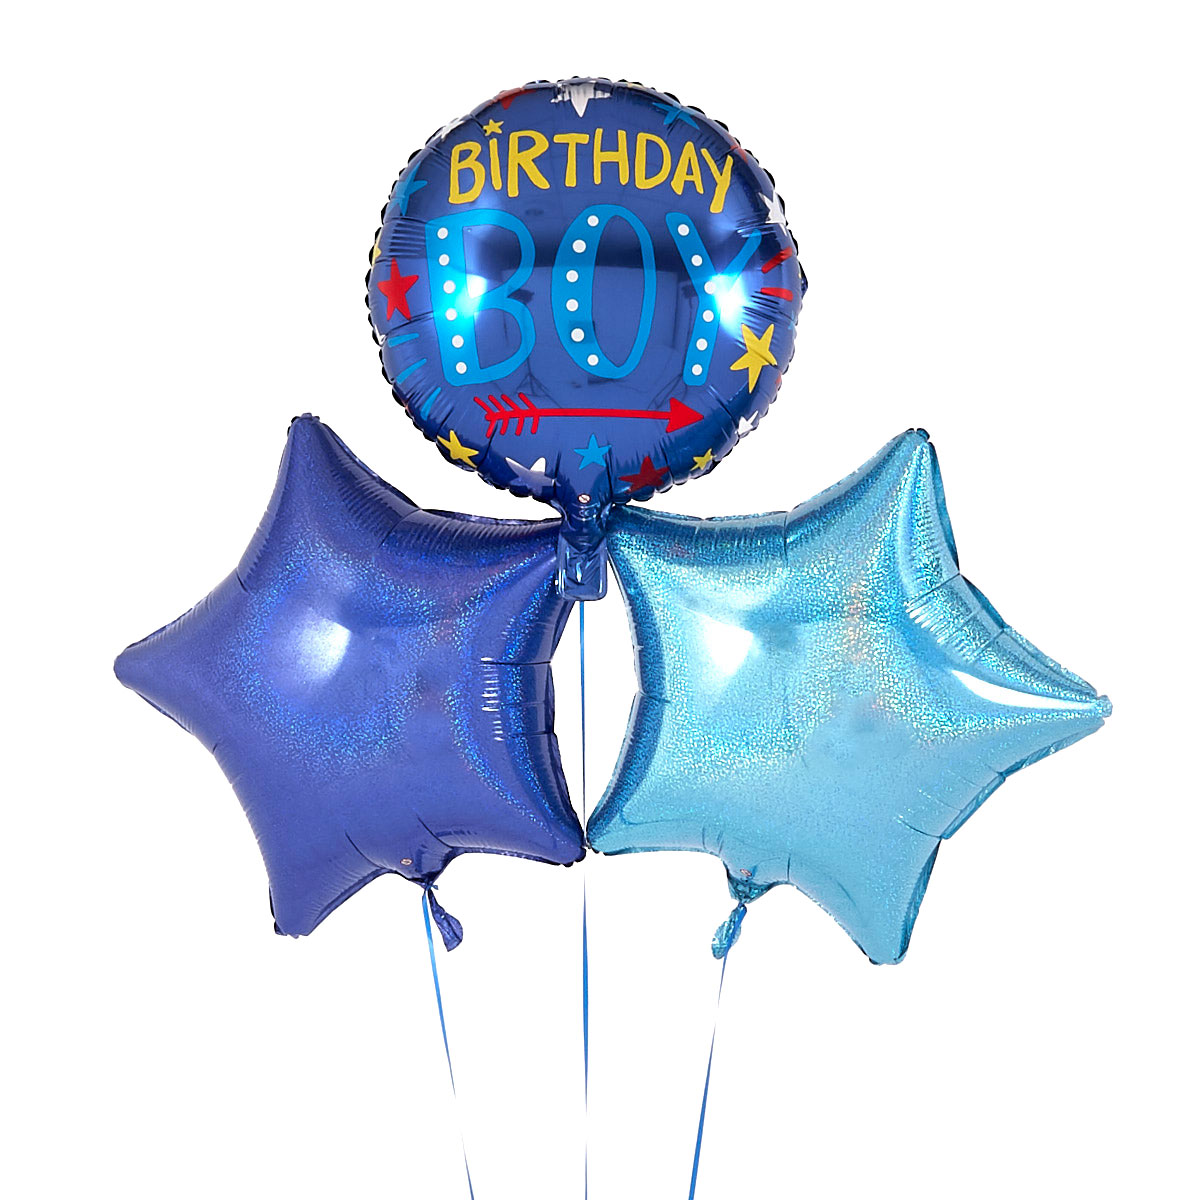 Birthday Boy Blue Balloon Bouquet - DELIVERED INFLATED!